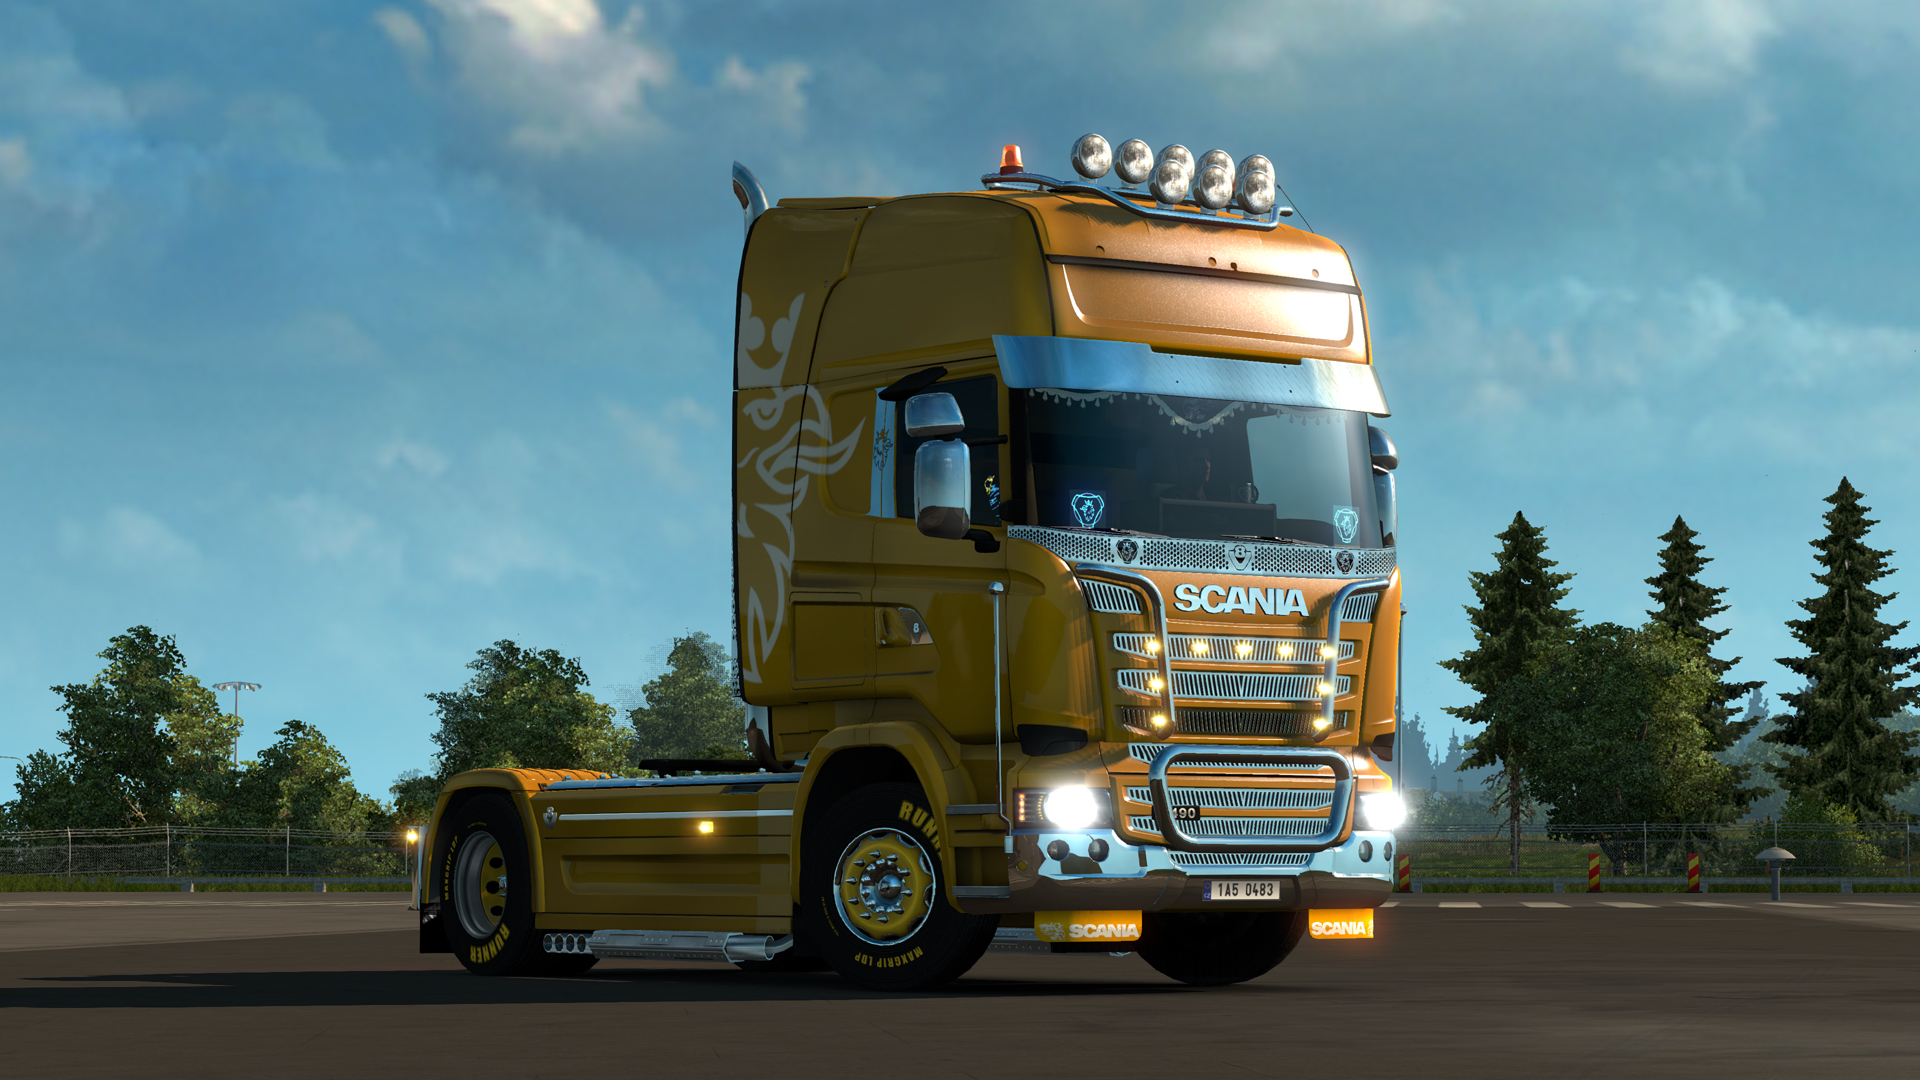 Eurotruck. Euro Truck Simulator 2. Euro Truck Simulator 2 - Mighty Griffin Tuning Pack. Евро трак симулятор 1. Scania Mighty Griffin s 730 ETS.